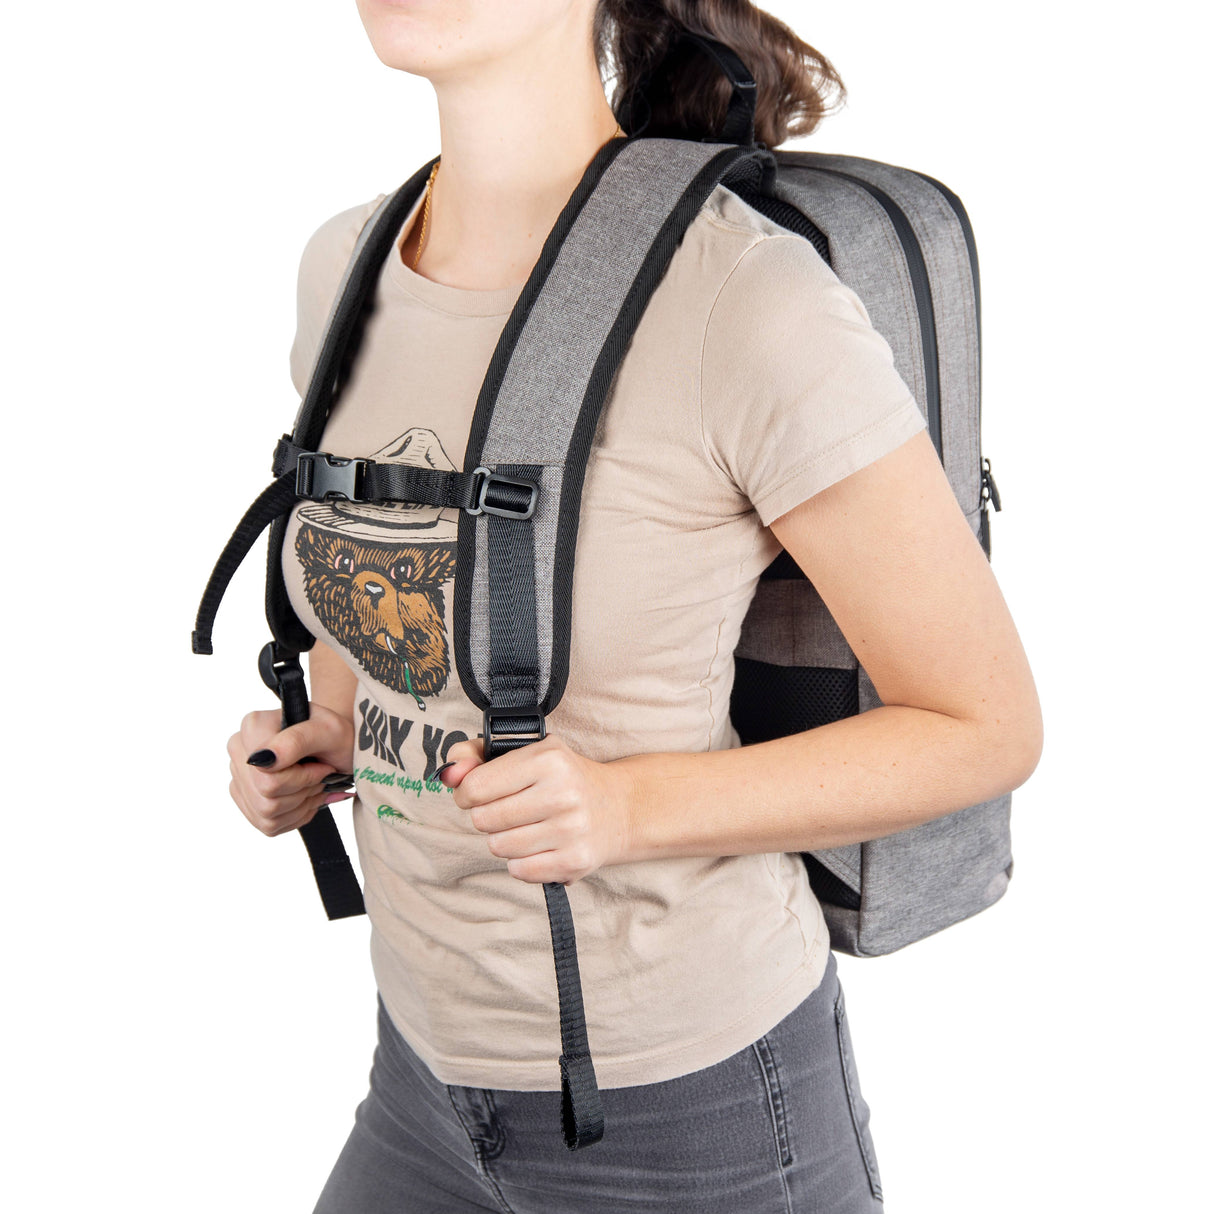 A girl in a tan shirt is wearing the gray Ooze backpack with the straps  buckled across her chest